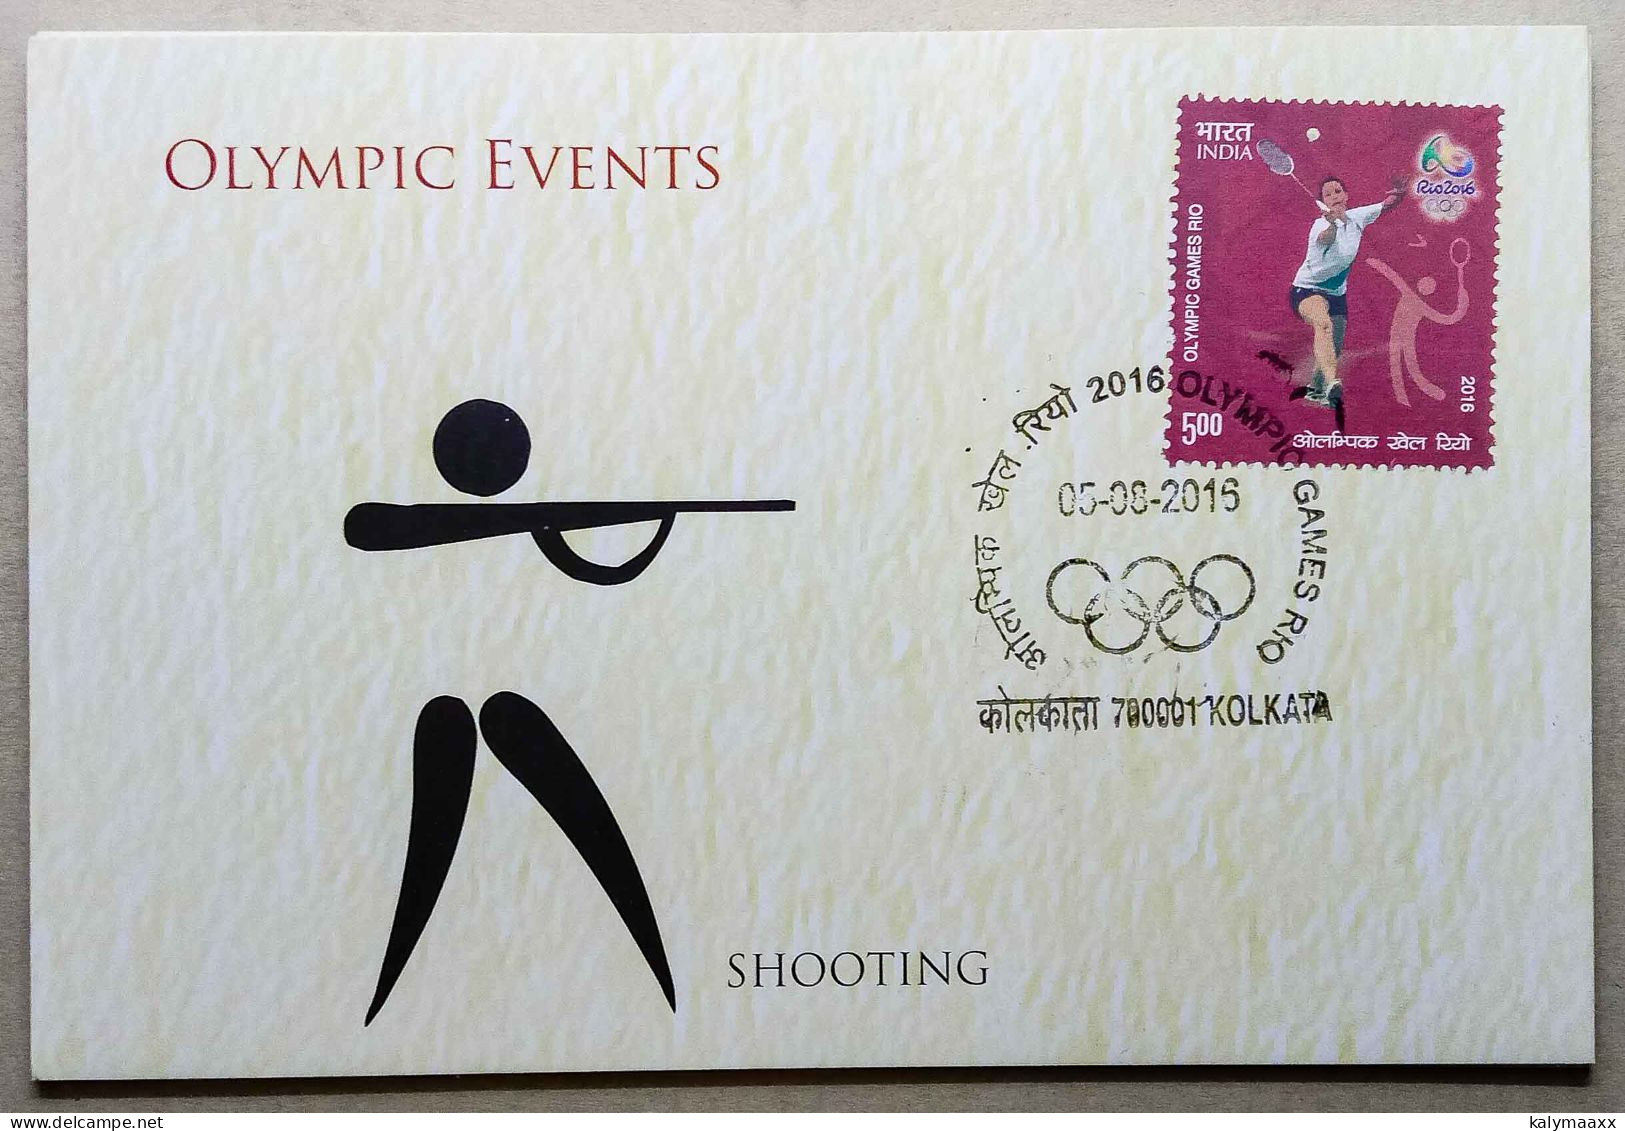 INDIA 2016 OLYMPIC EVENTS, SHOOTING, INDIA POST ISSUED POSTCARD...RARE - Waffenschiessen